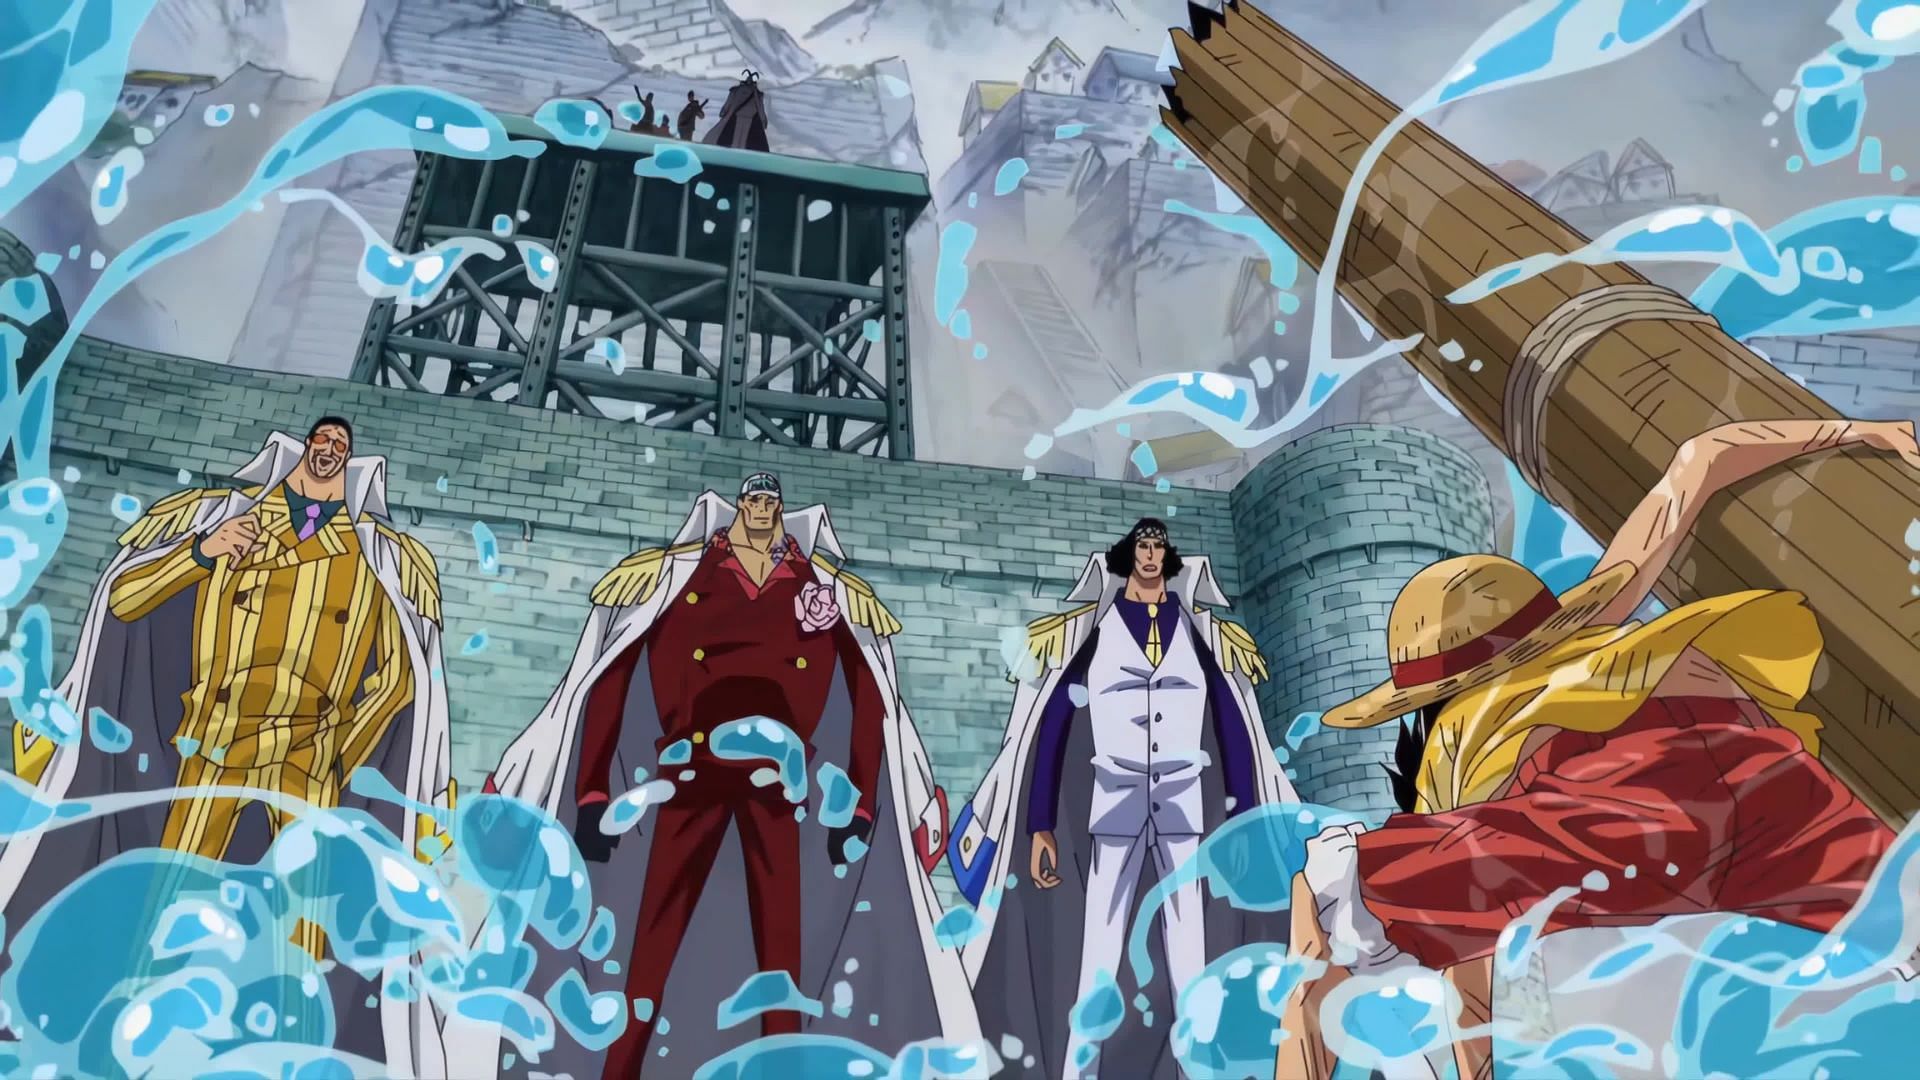 Monkey D. Luffy faces off against the 3 admirals (Image via Toei Animation)